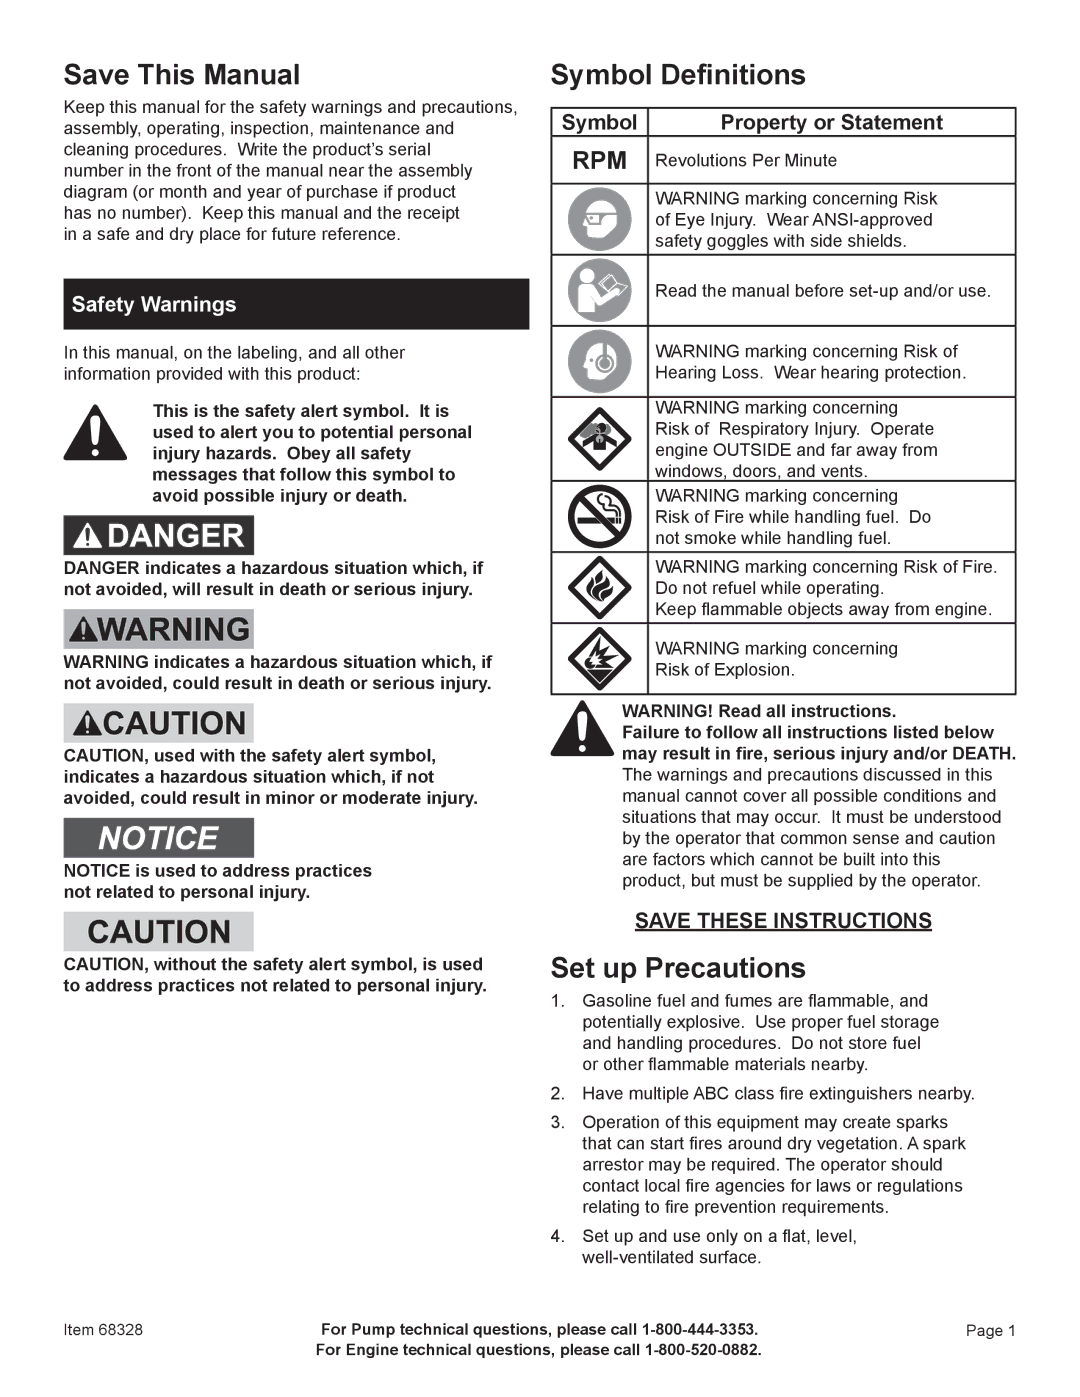 Harbor Freight Tools 68328 manual Save This Manual, Symbol Definitions, Set up Precautions, Safety Warnings 